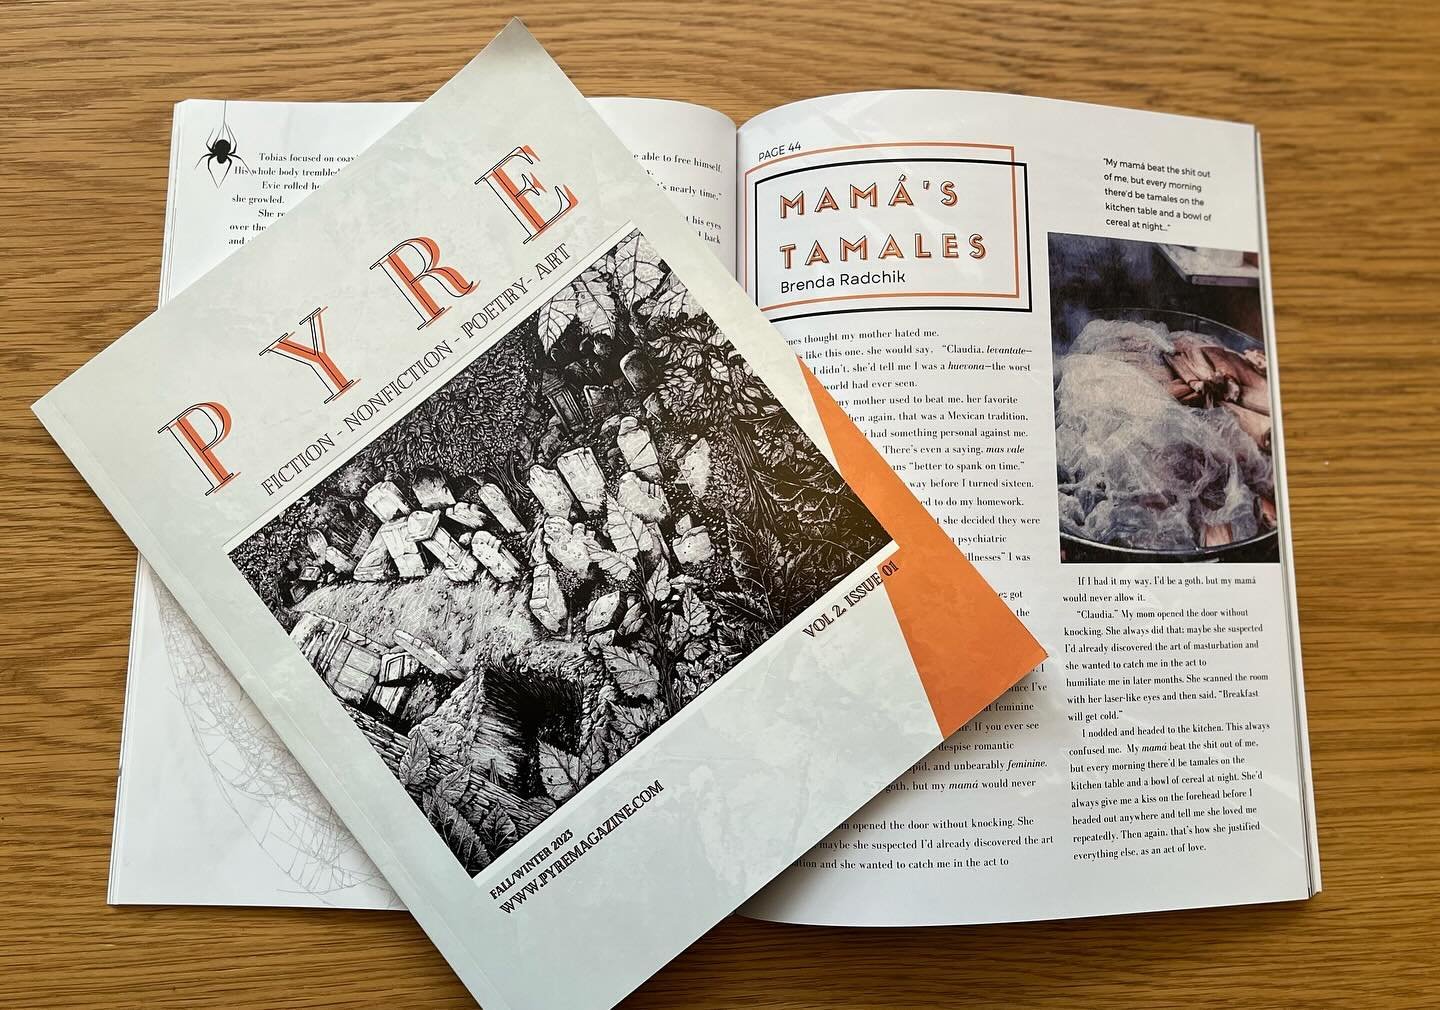 Grateful to have found such a gorgeous home for this story; next to super talented authors such as @jasonhuls (You&rsquo;ll never look at raincoats the same way). 

Thank you @pyre.magazine for bringing forth our tales of darkness.

Mam&aacute;&rsquo